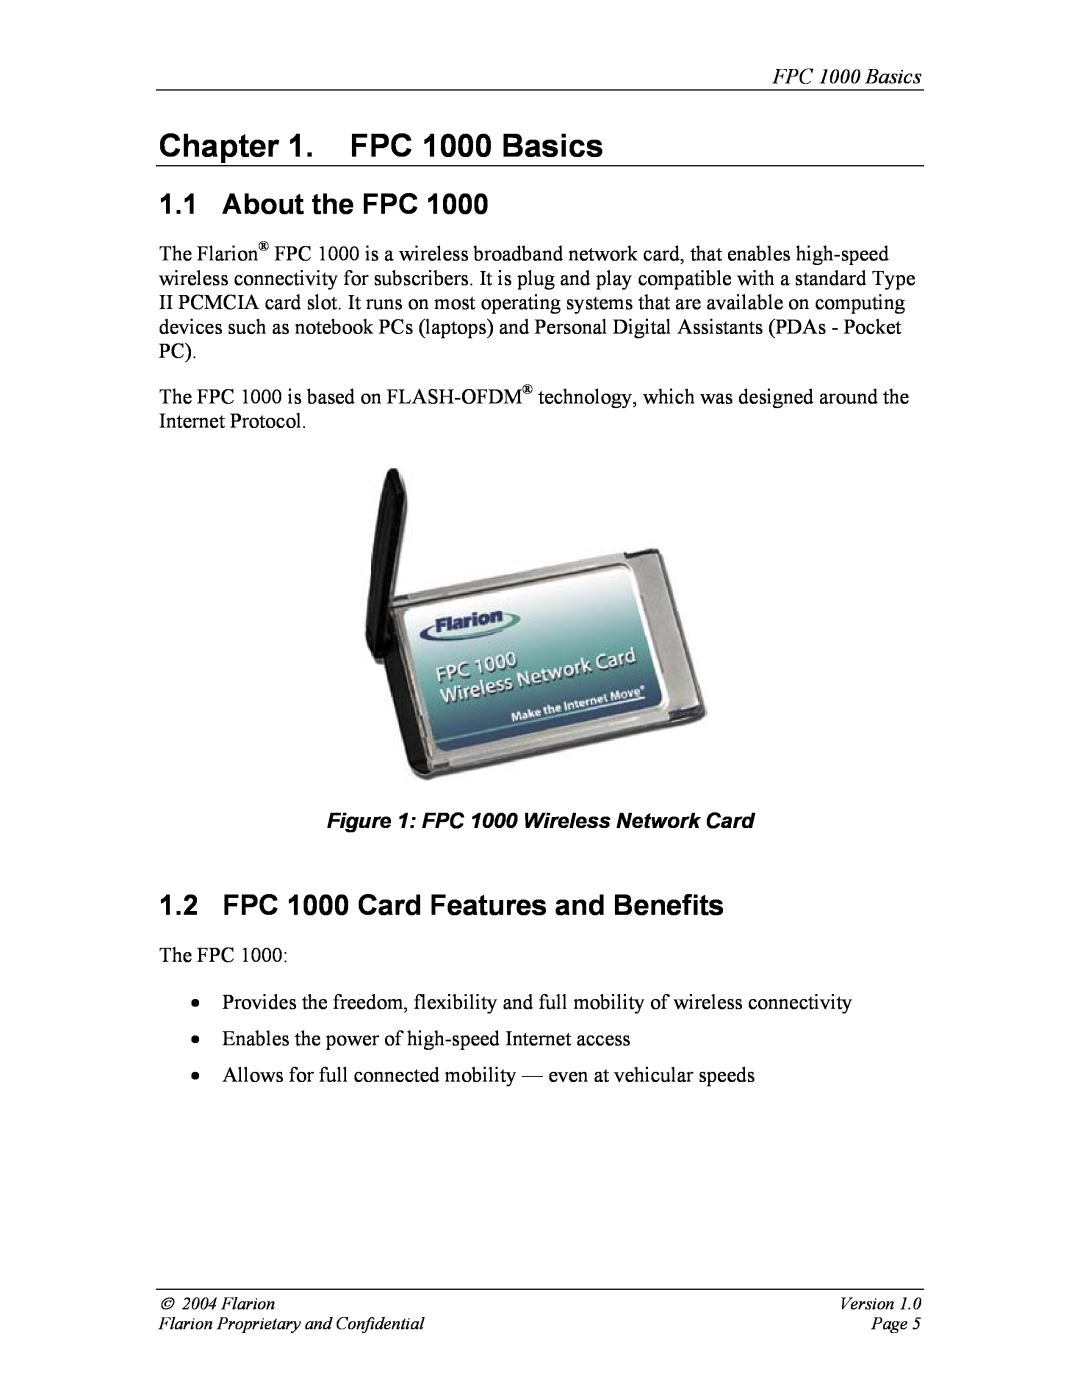 GE manual FPC 1000 Basics, About the FPC, FPC 1000 Card Features and Benefits, FPC 1000 Wireless Network Card 